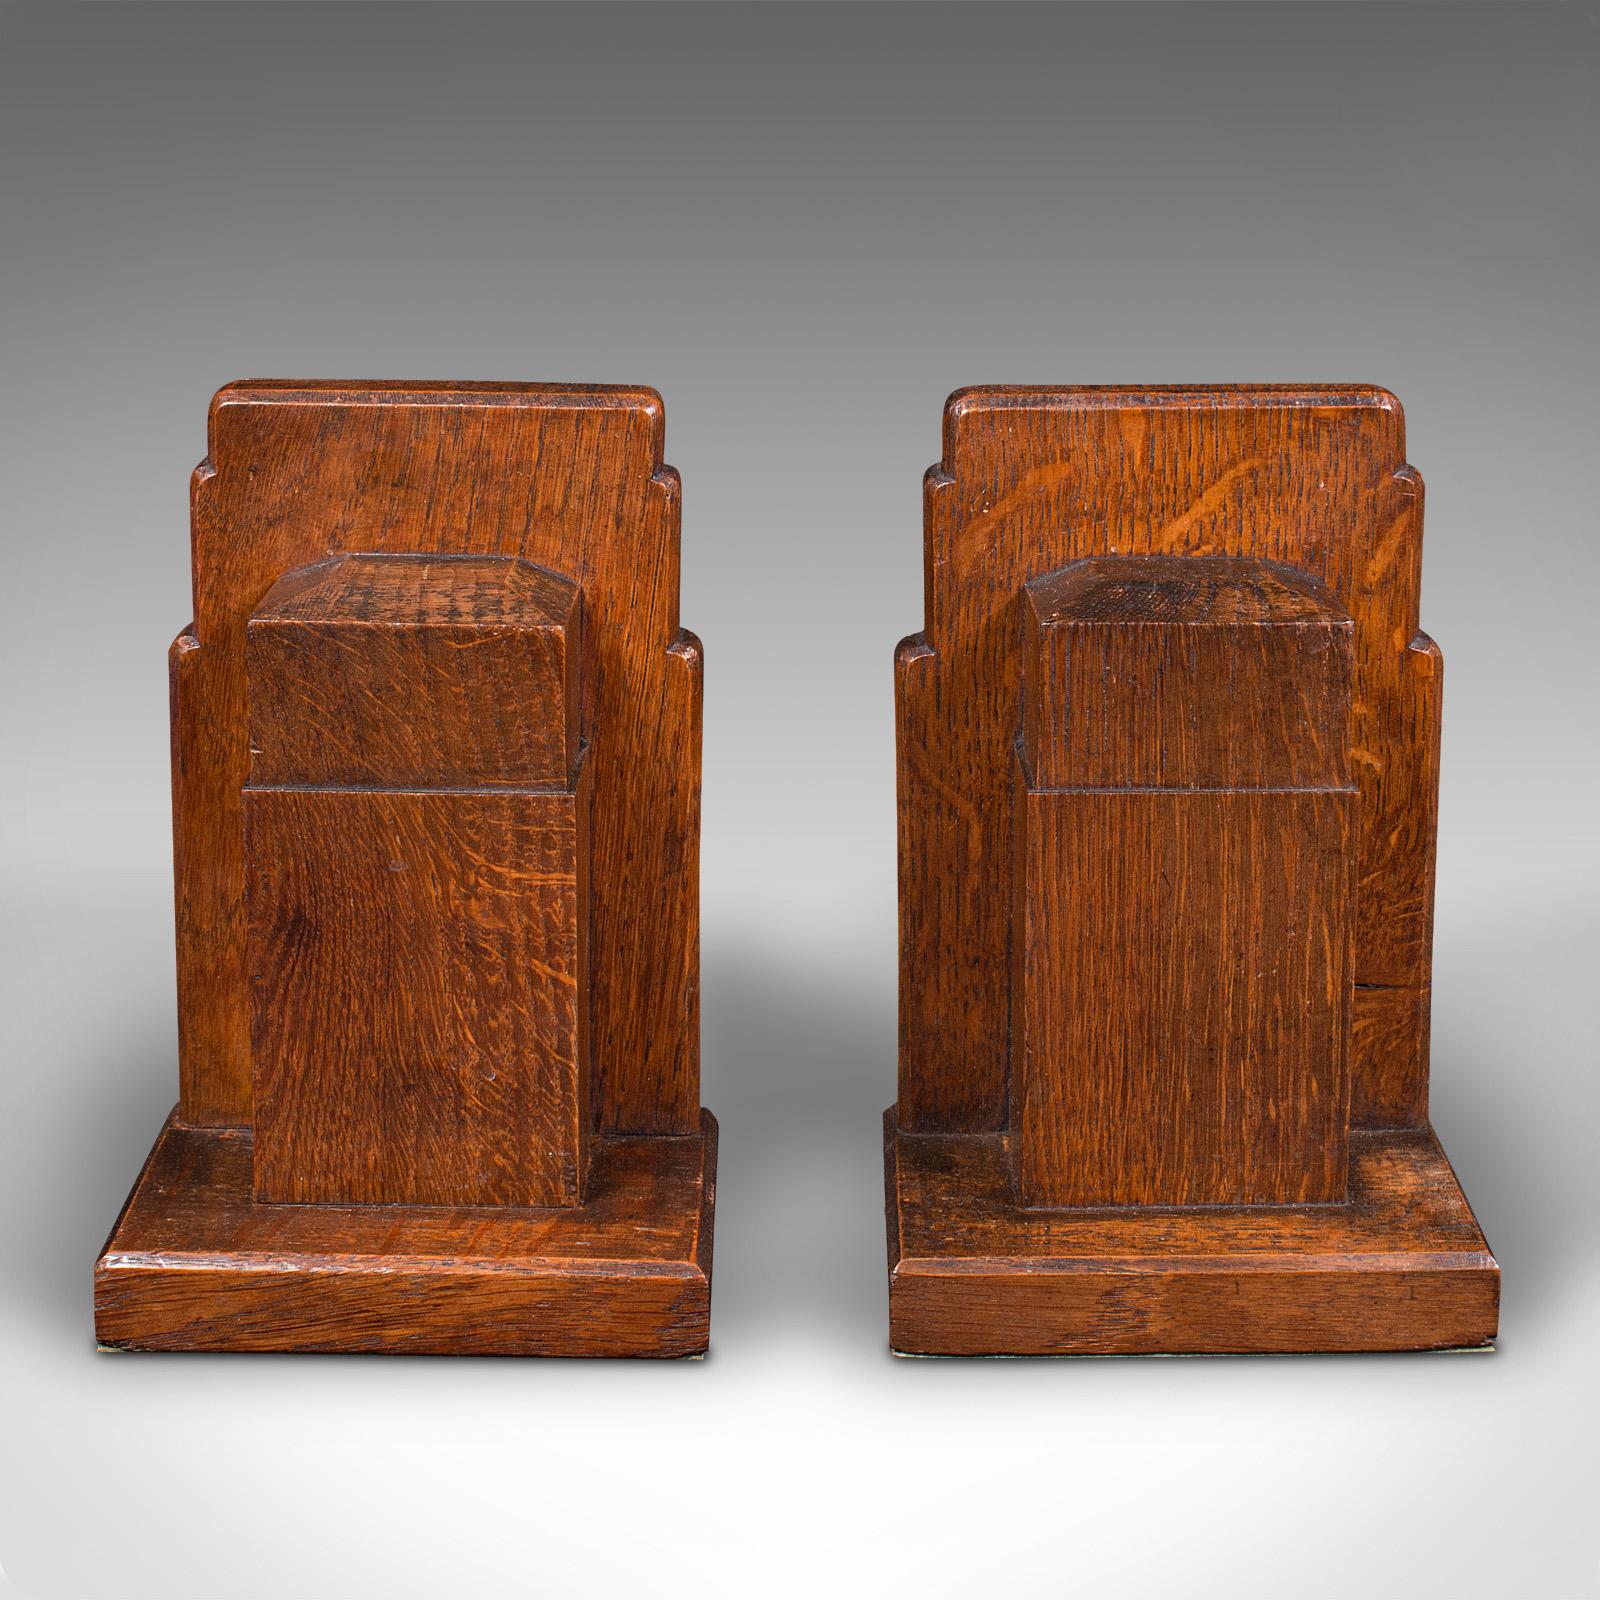 British Pair of Vintage Decorative Bookends, English, Oak, Book Rest, Early 20th, C.1930 For Sale